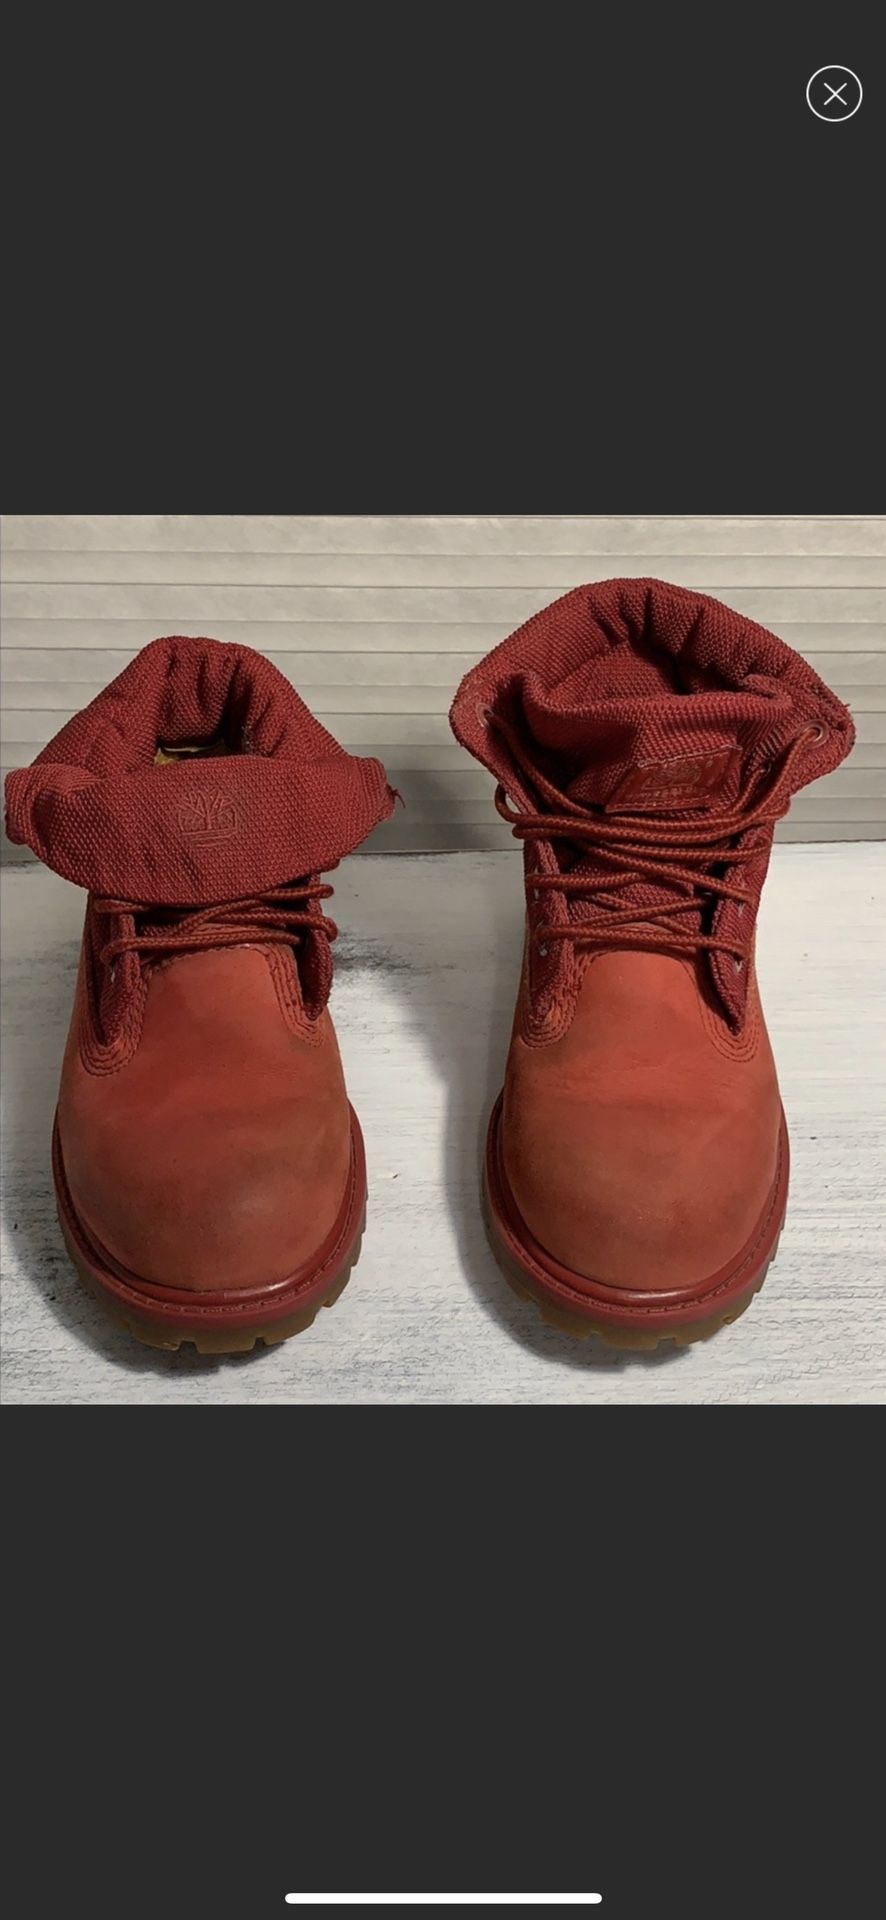 Red Timberland Boots kidd size 11 GUC